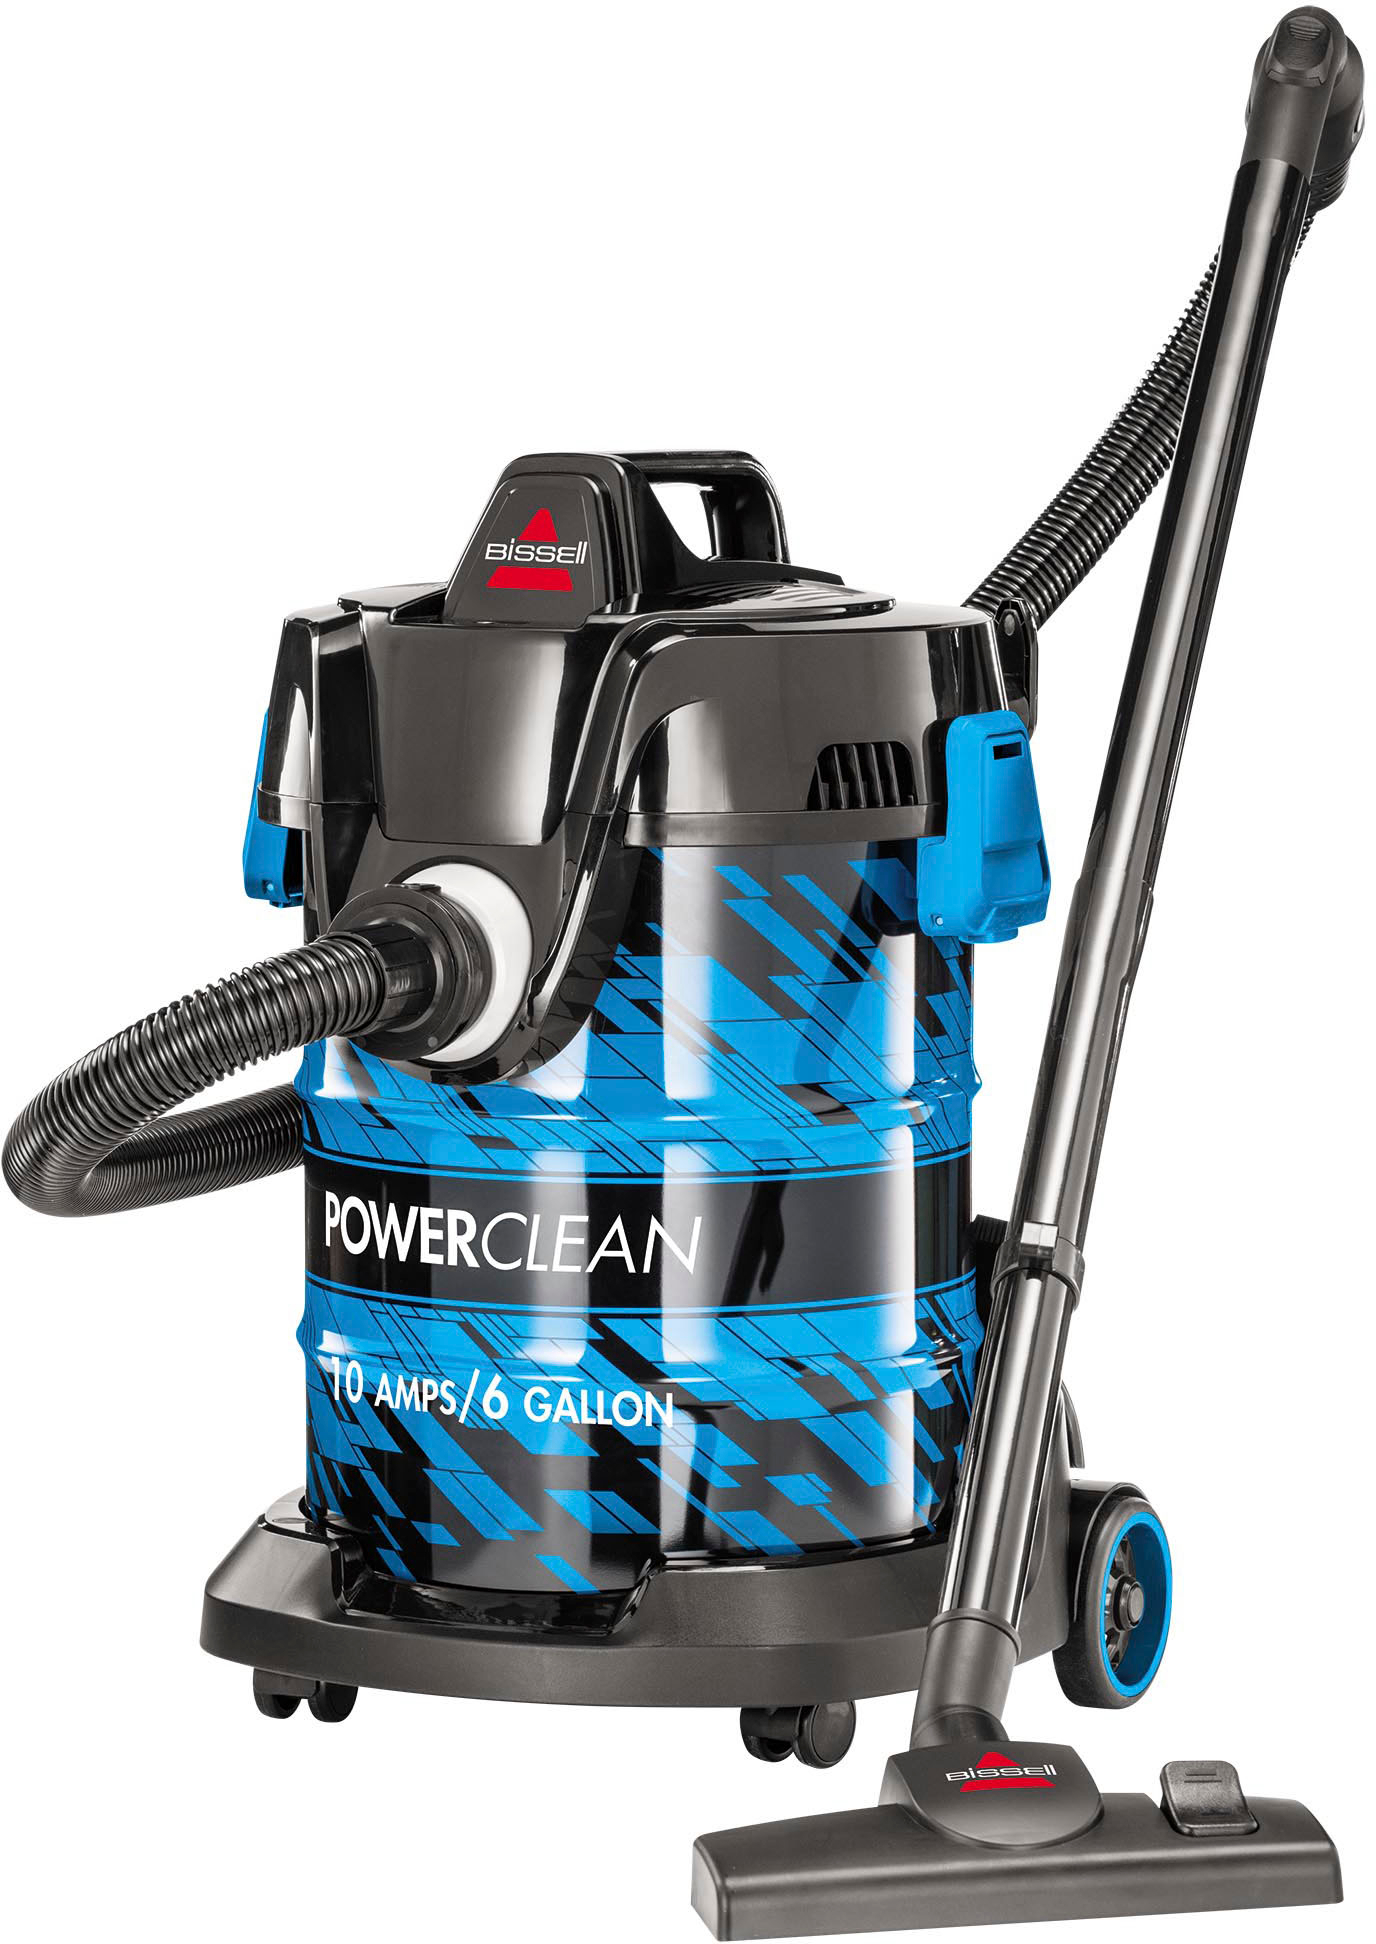 Angle View: BISSELL - PowerClean Wet and Dry Canister Vacuum - Black with Baha Blue Accents